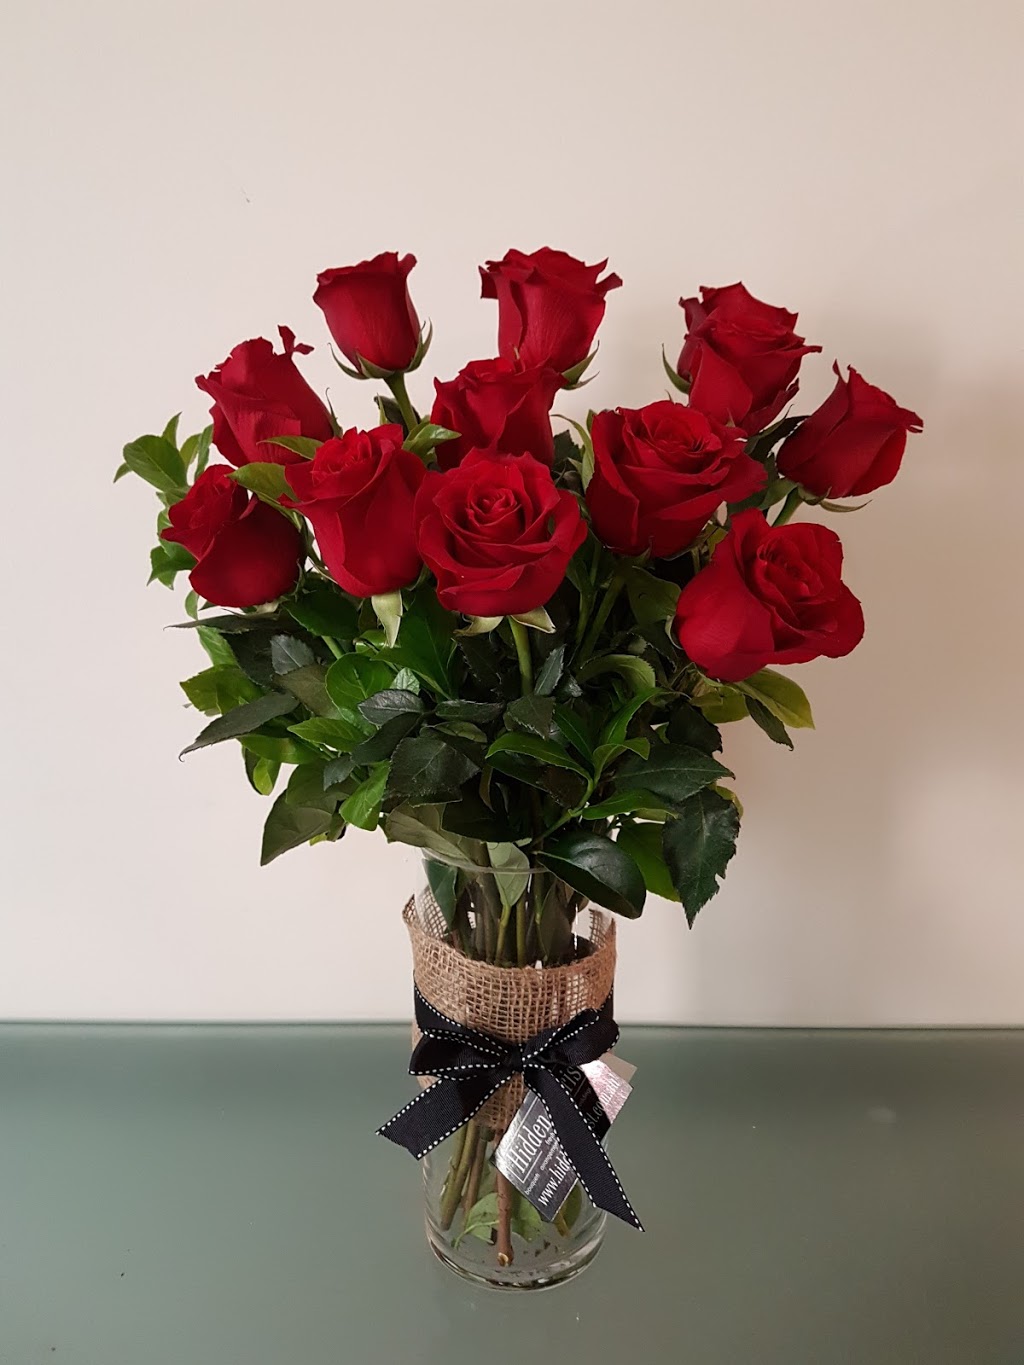 Hidden Florist | florist | 40 Phillip Drive Same day delivery with orders before 2pm, Collection by Appointment Only, Sunbury VIC 3429, Australia | 0409280087 OR +61 409 280 087